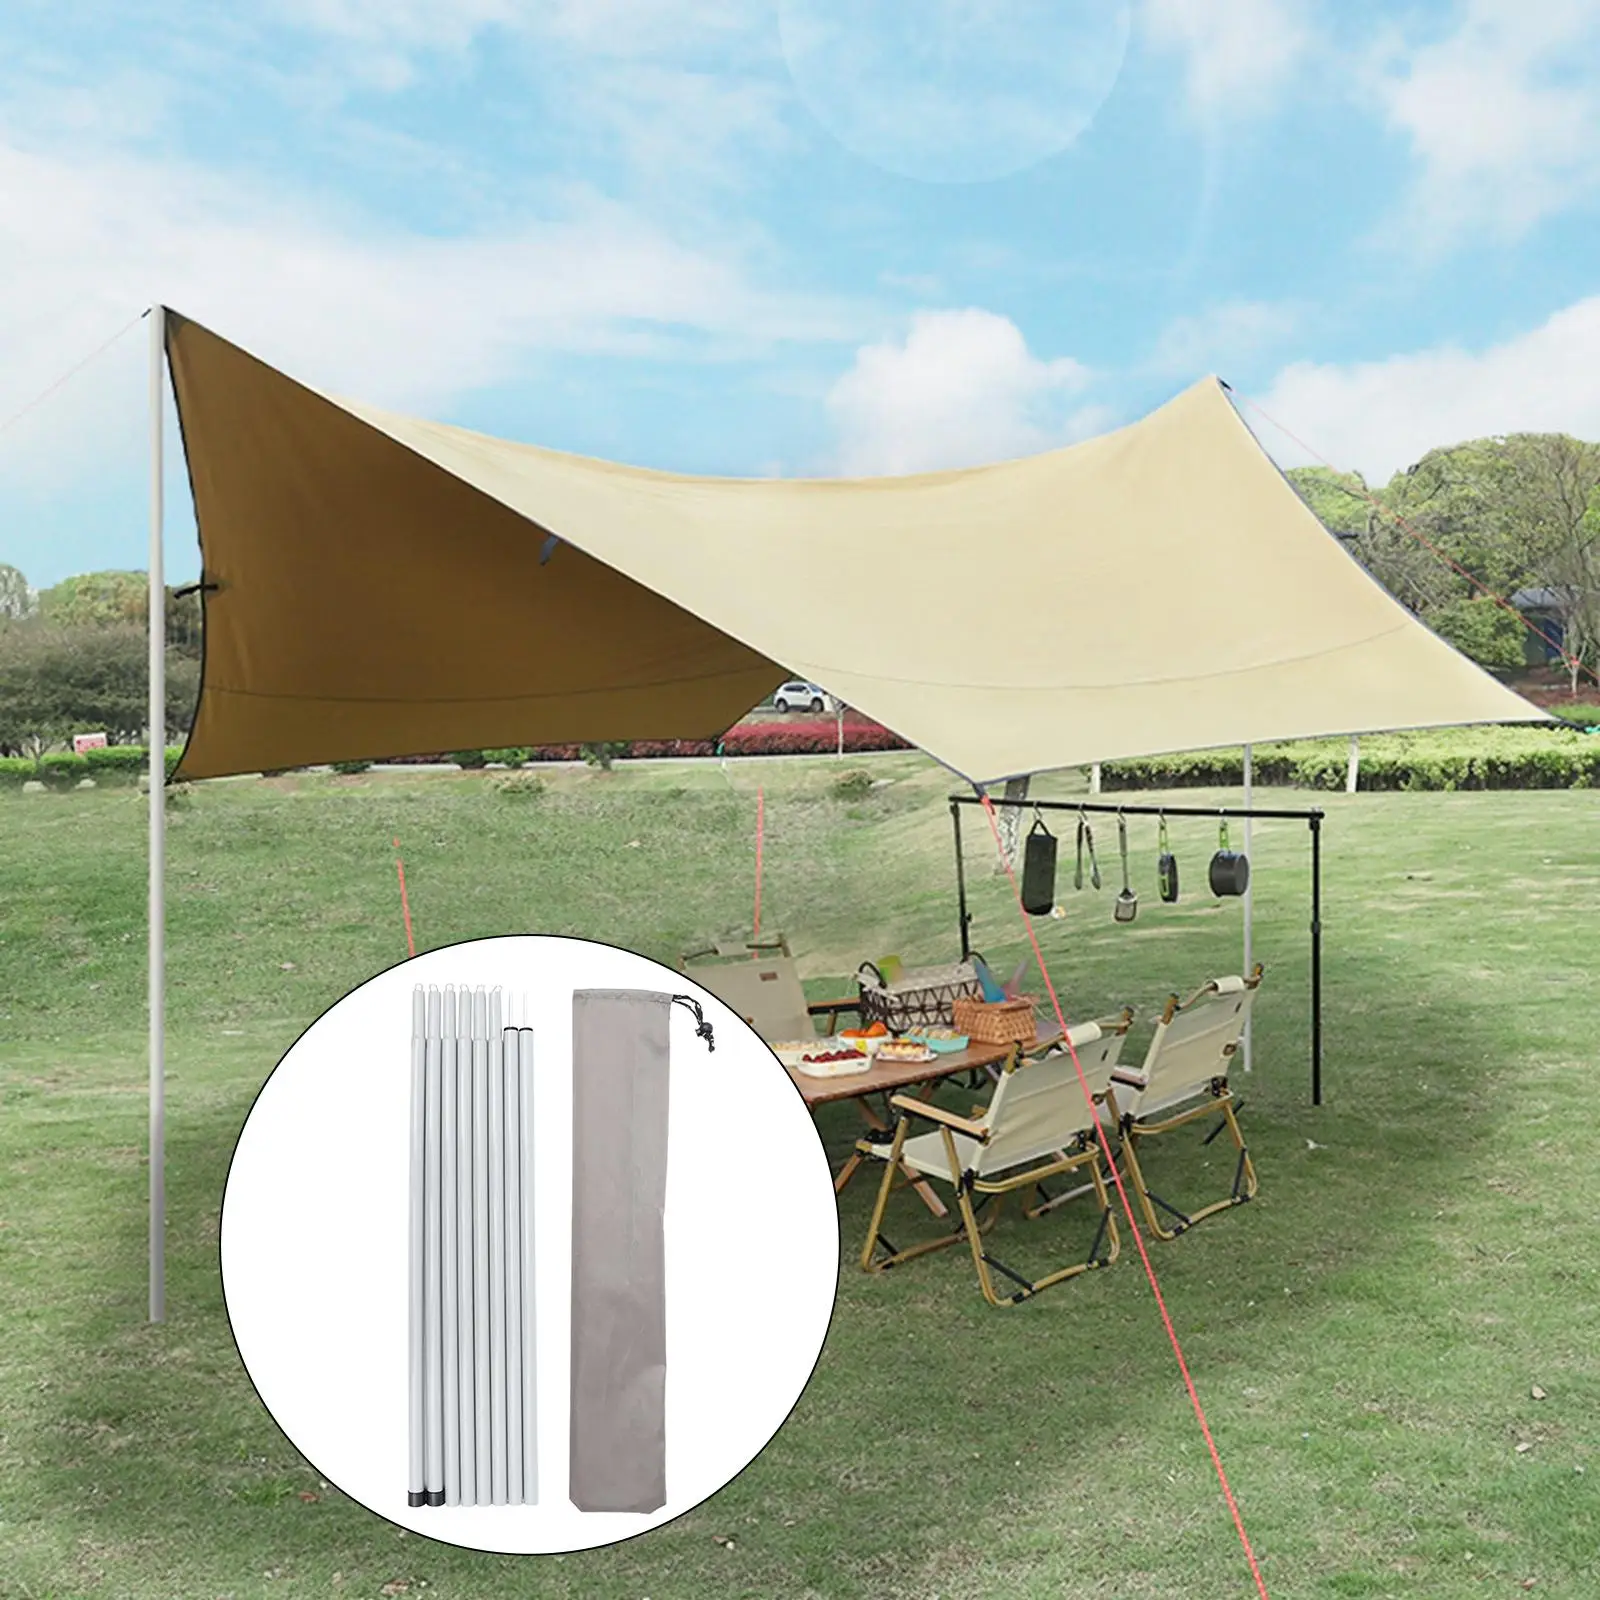 Tent Awning Pole Folding Iron Tube Canopy Rod For Outdoor Camping Hiking Travel Sunshade Tarp Accessories